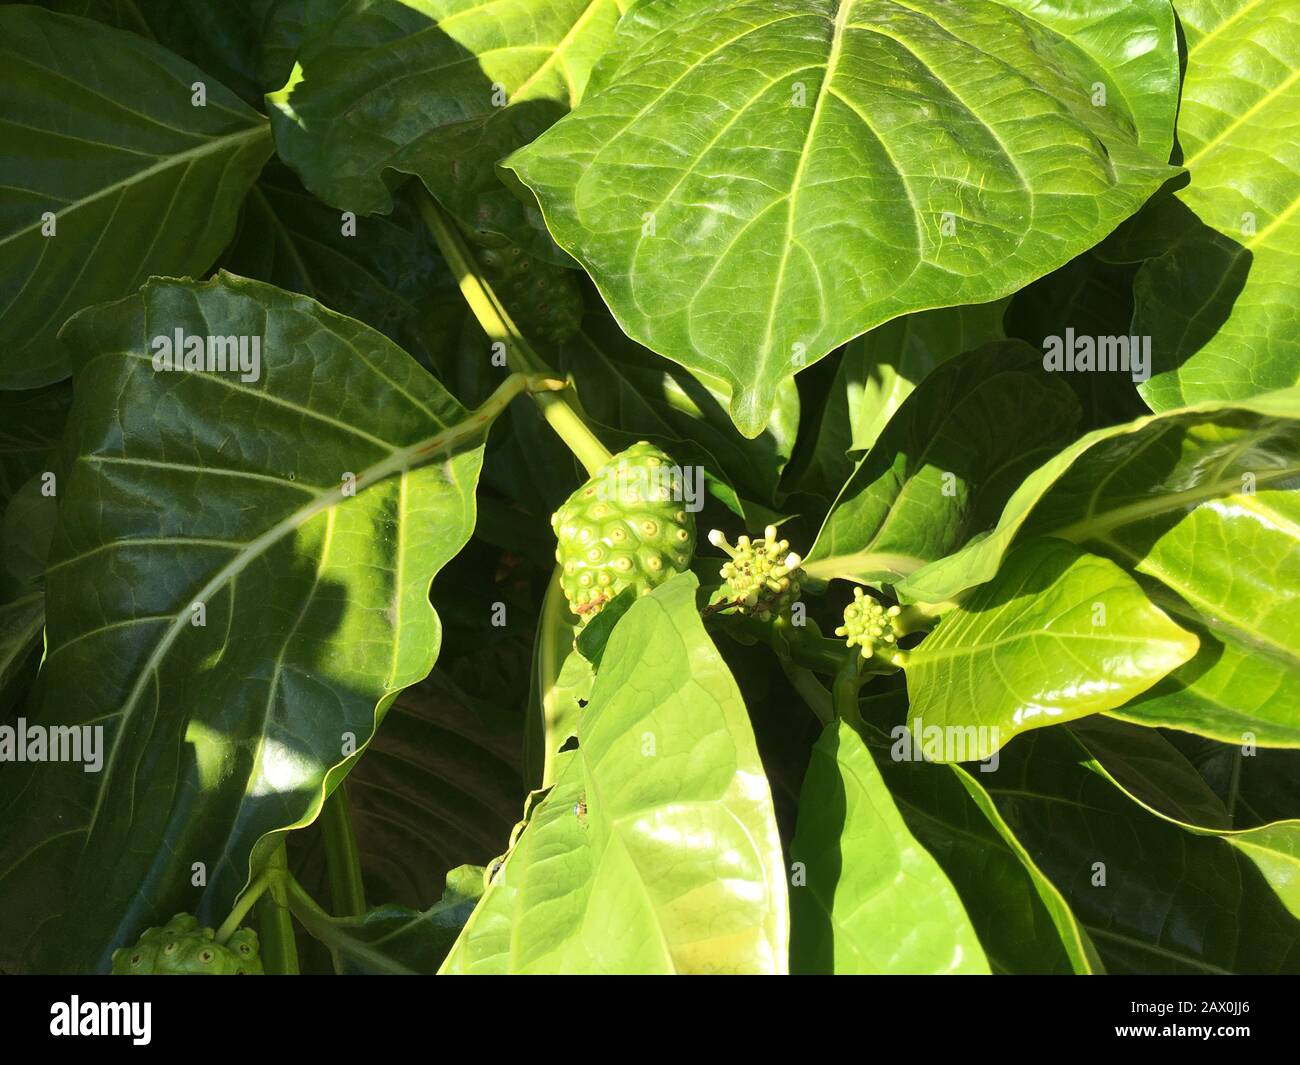 Morinda citrifolia is a fruit-bearing tree in the coffee family, Rubiaceae. Stock Photo